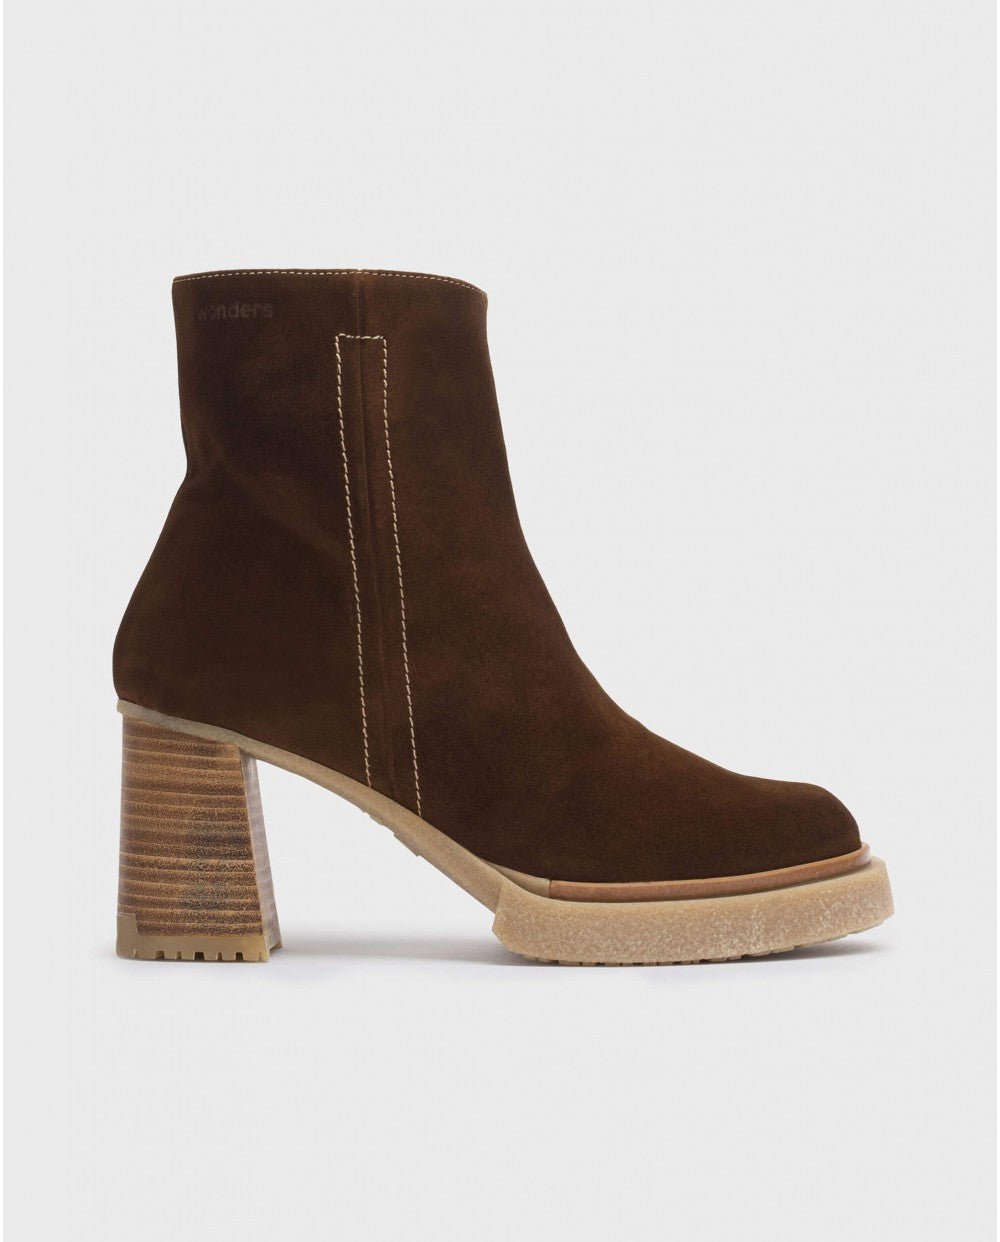 Wonders - Brown Leather Suede Ankle Boots